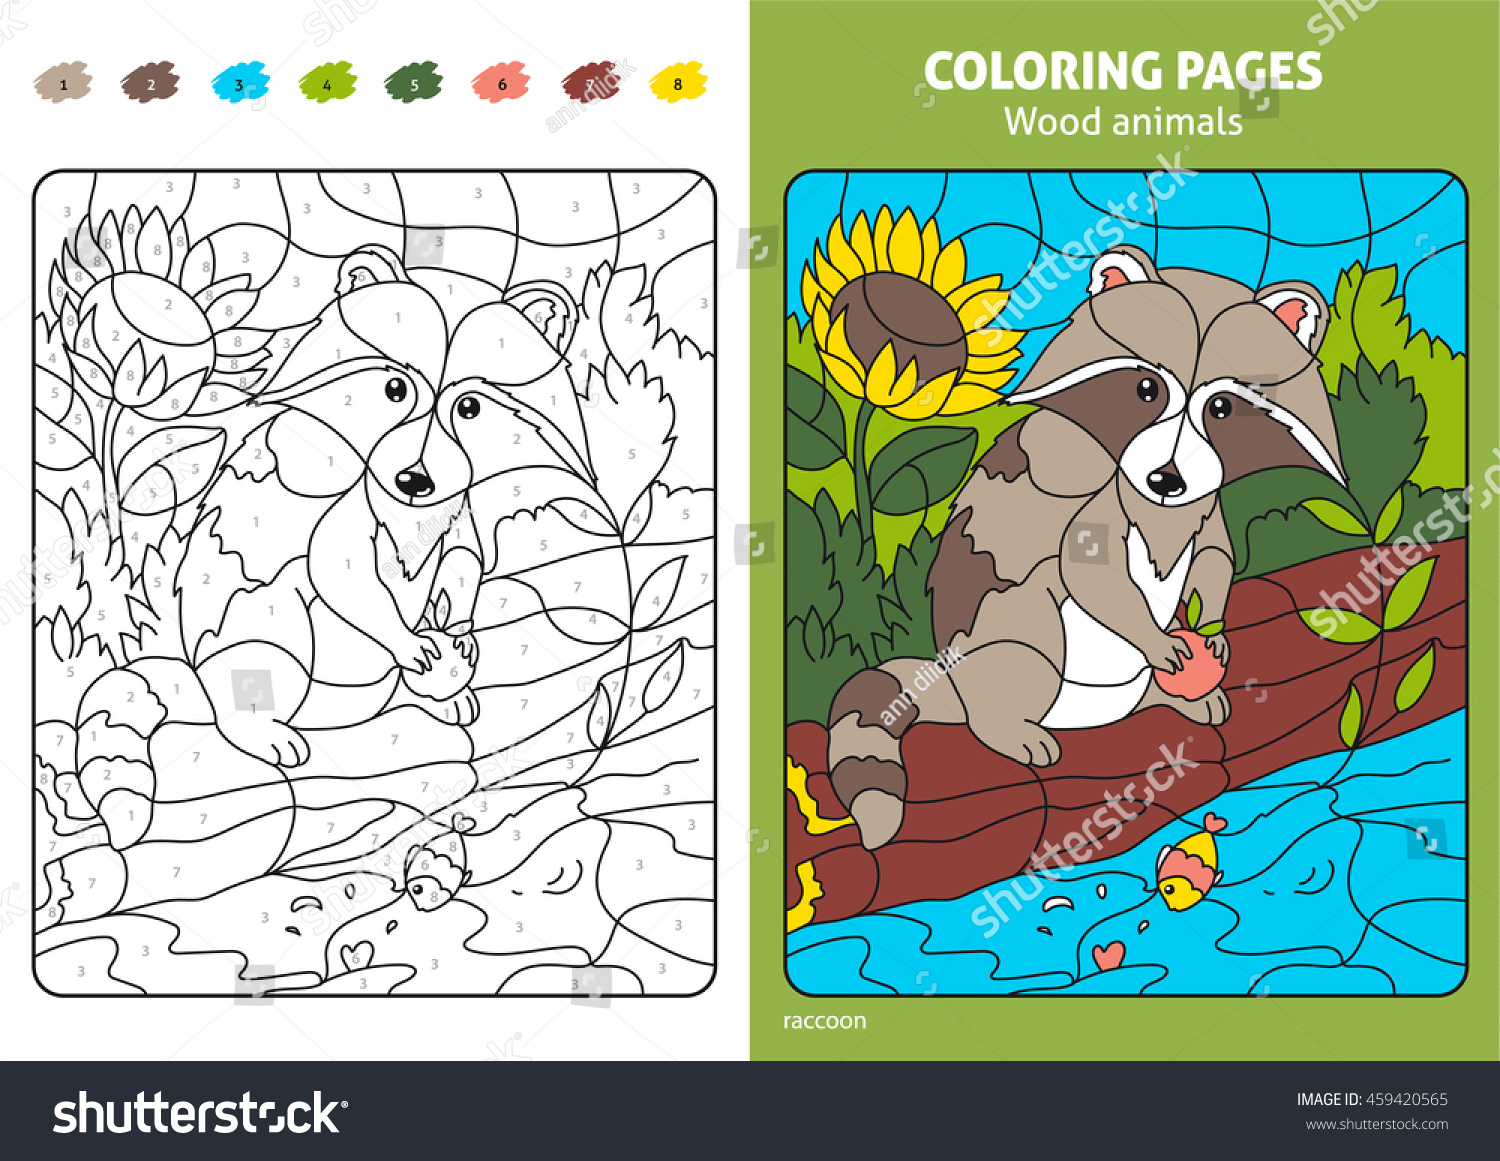 Wood animals coloring page kids raccoon stock vector royalty free